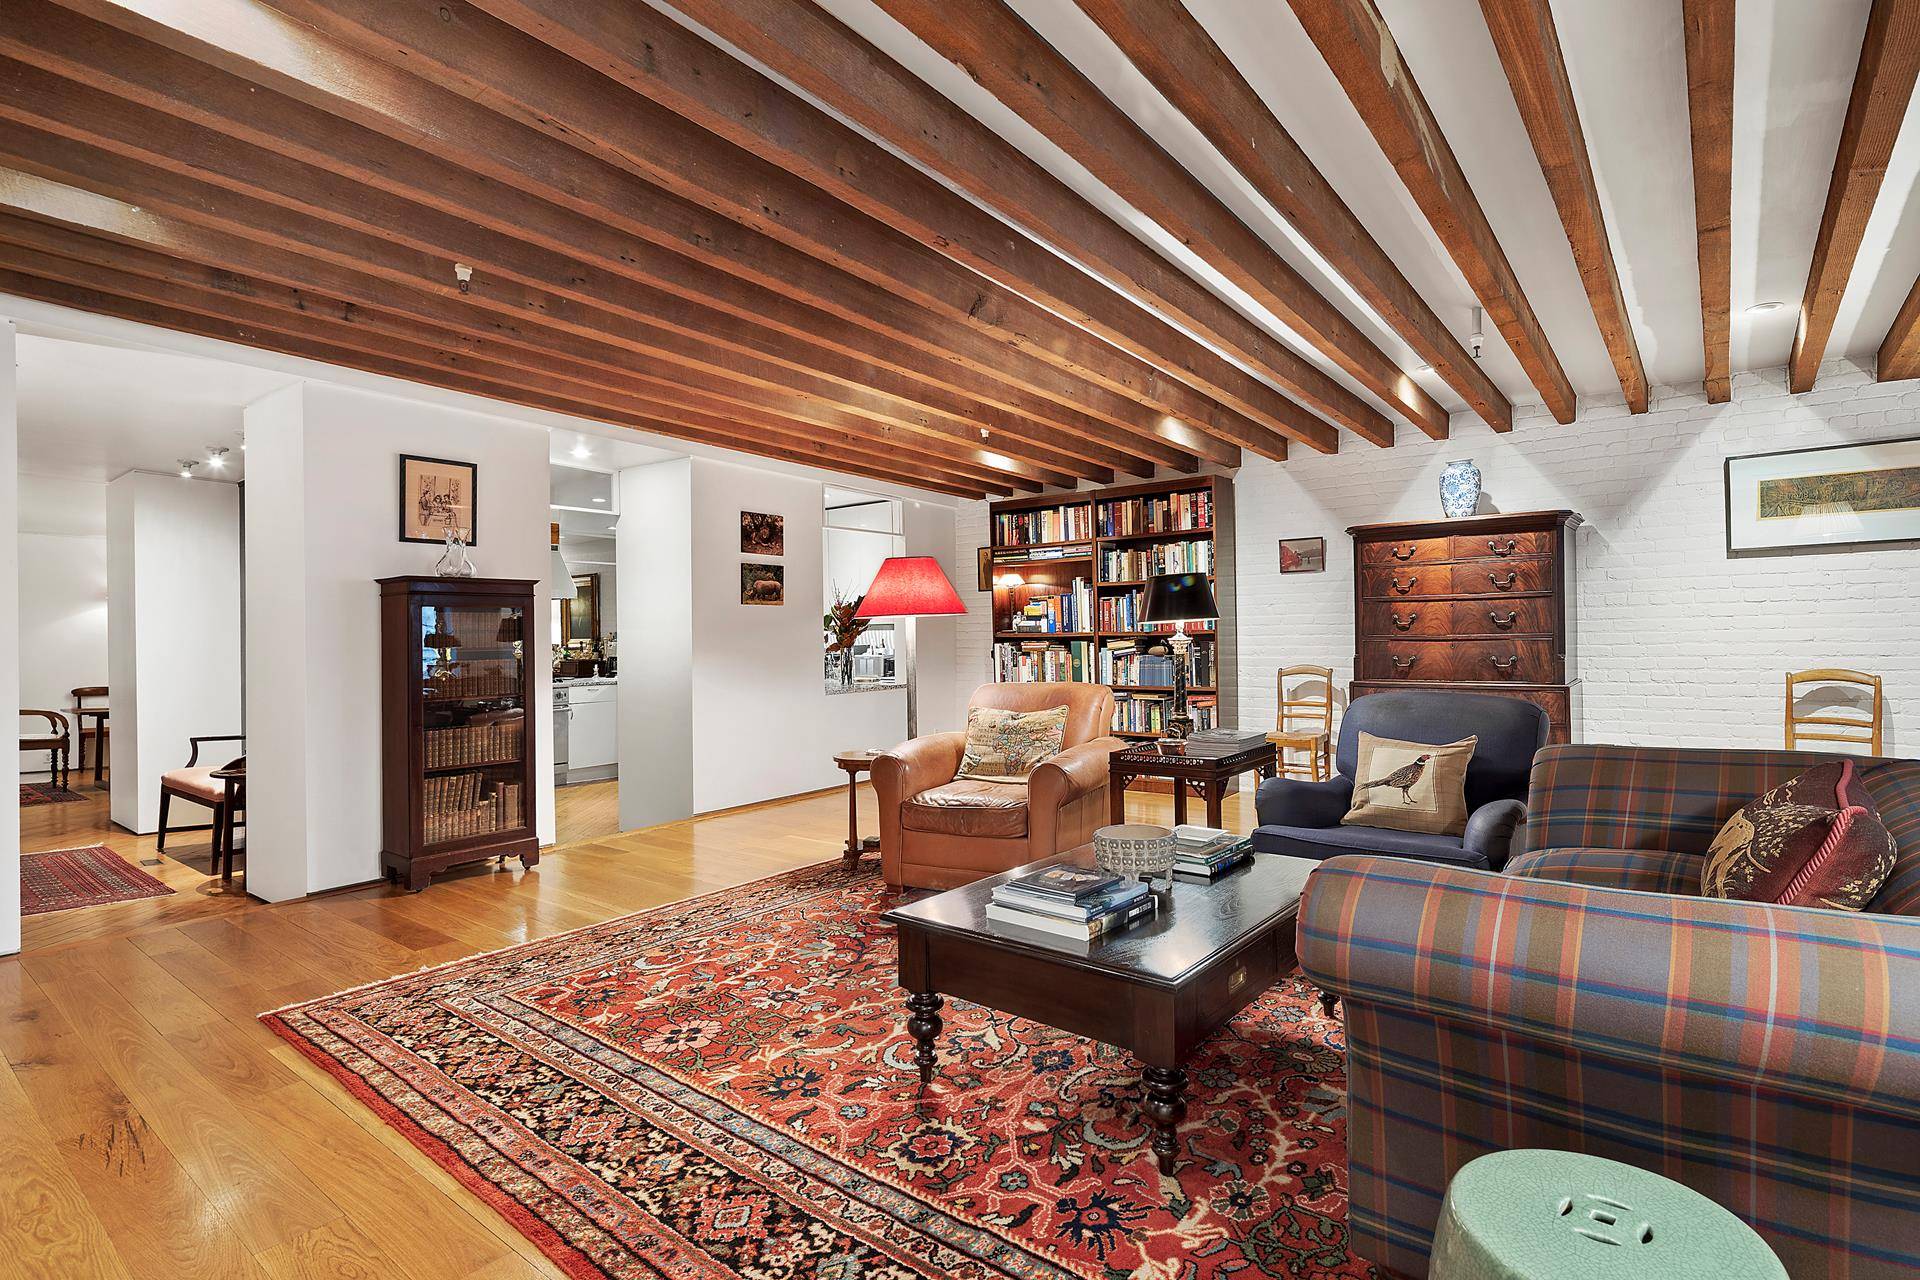 Originally constructed in the early 1900s as a printing factory, this apartment truly provides classic loft living in a modernized boutique condo building in Hudson Square.